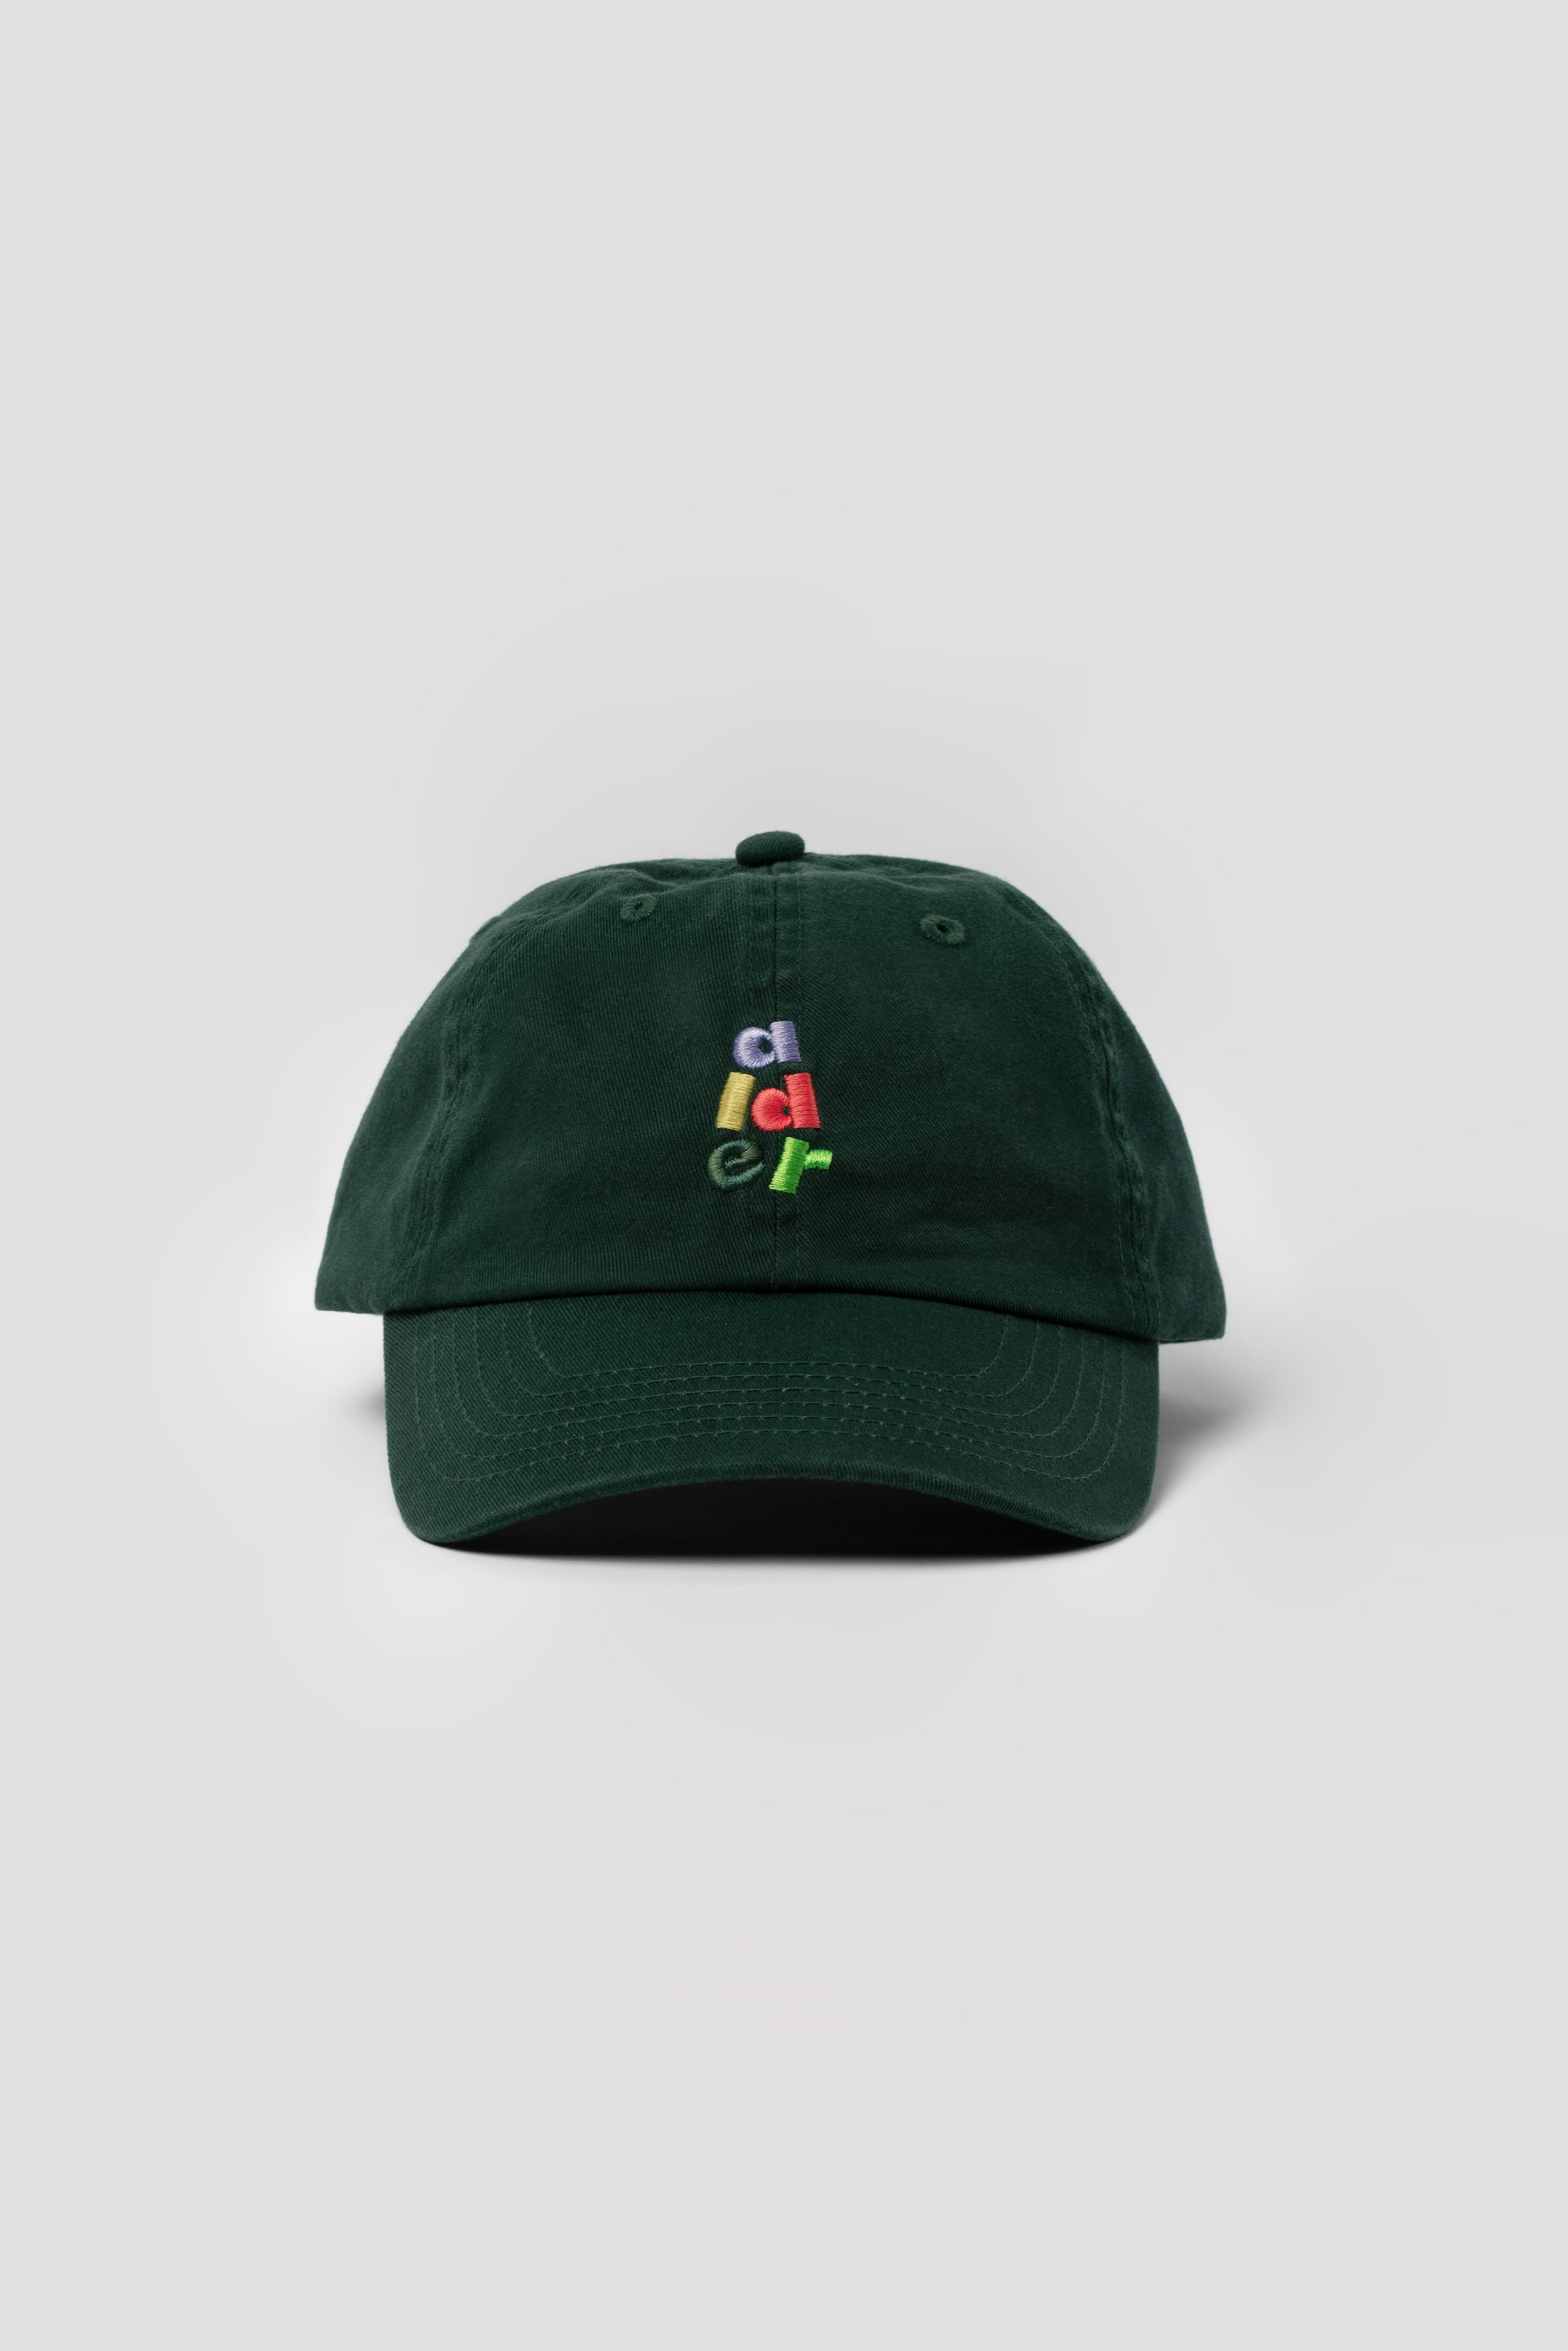 ~always-visible, Forest green with logo